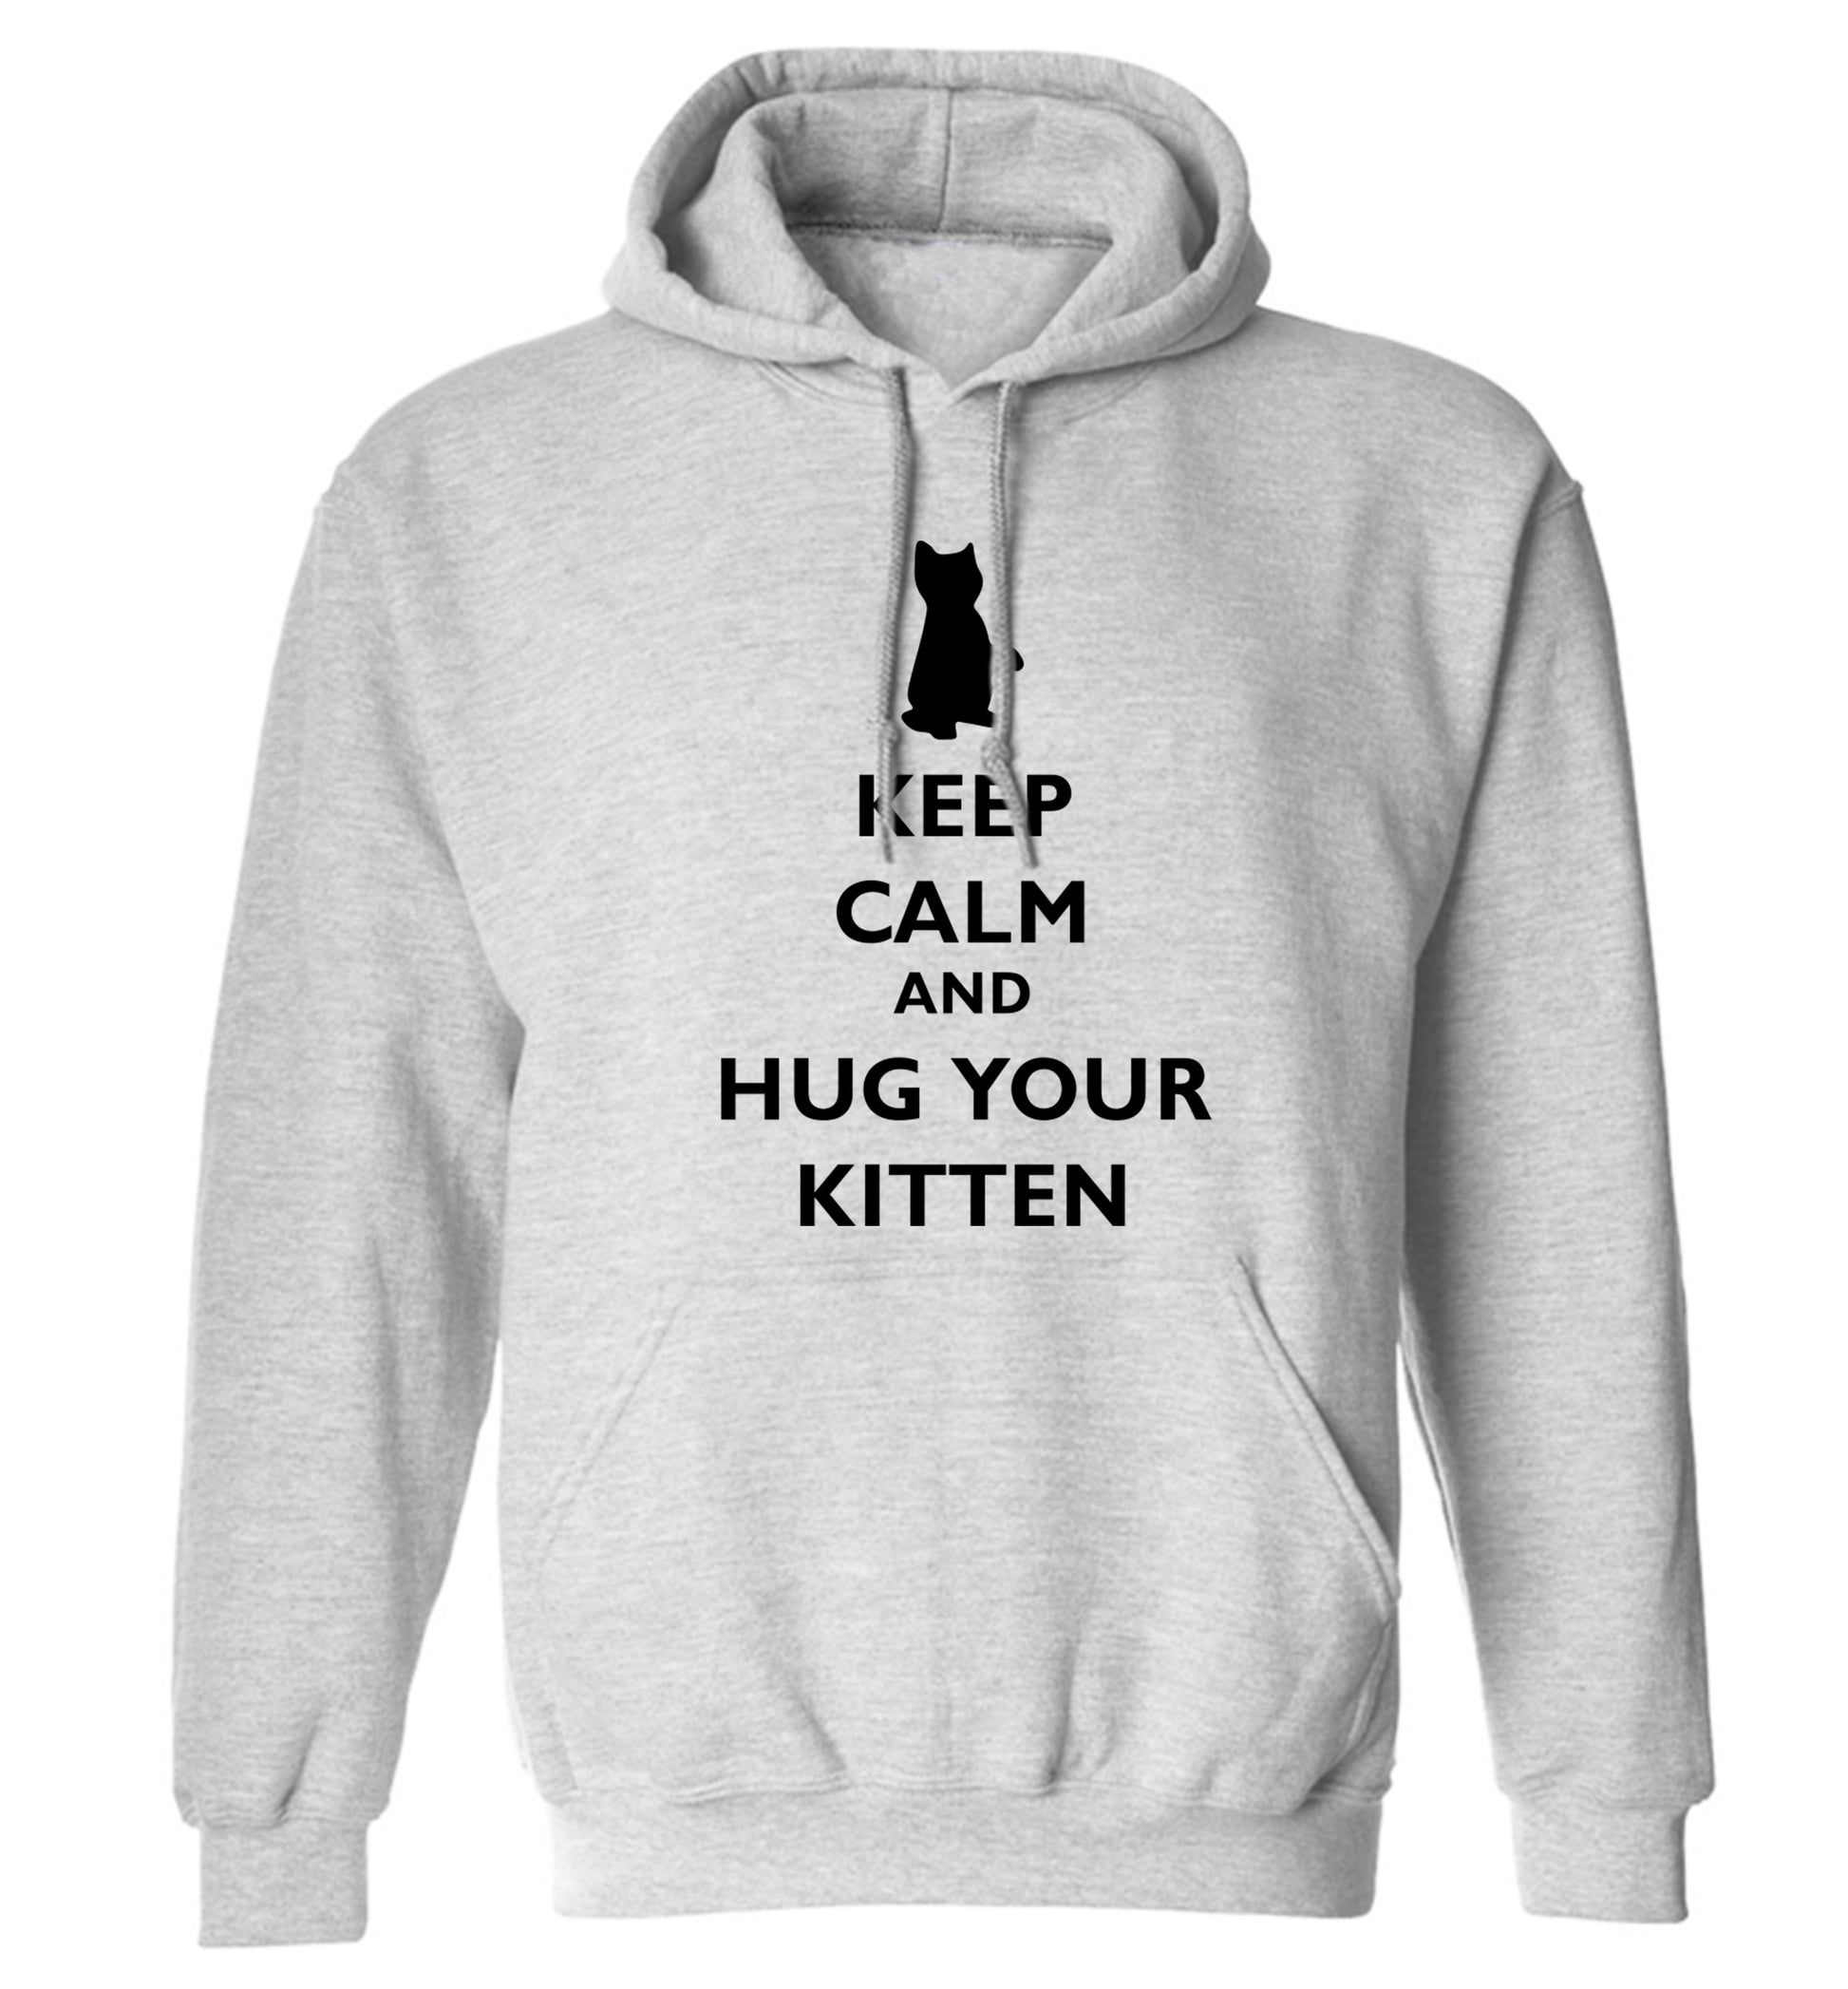 Keep calm and hug your kitten adults unisex grey hoodie 2XL